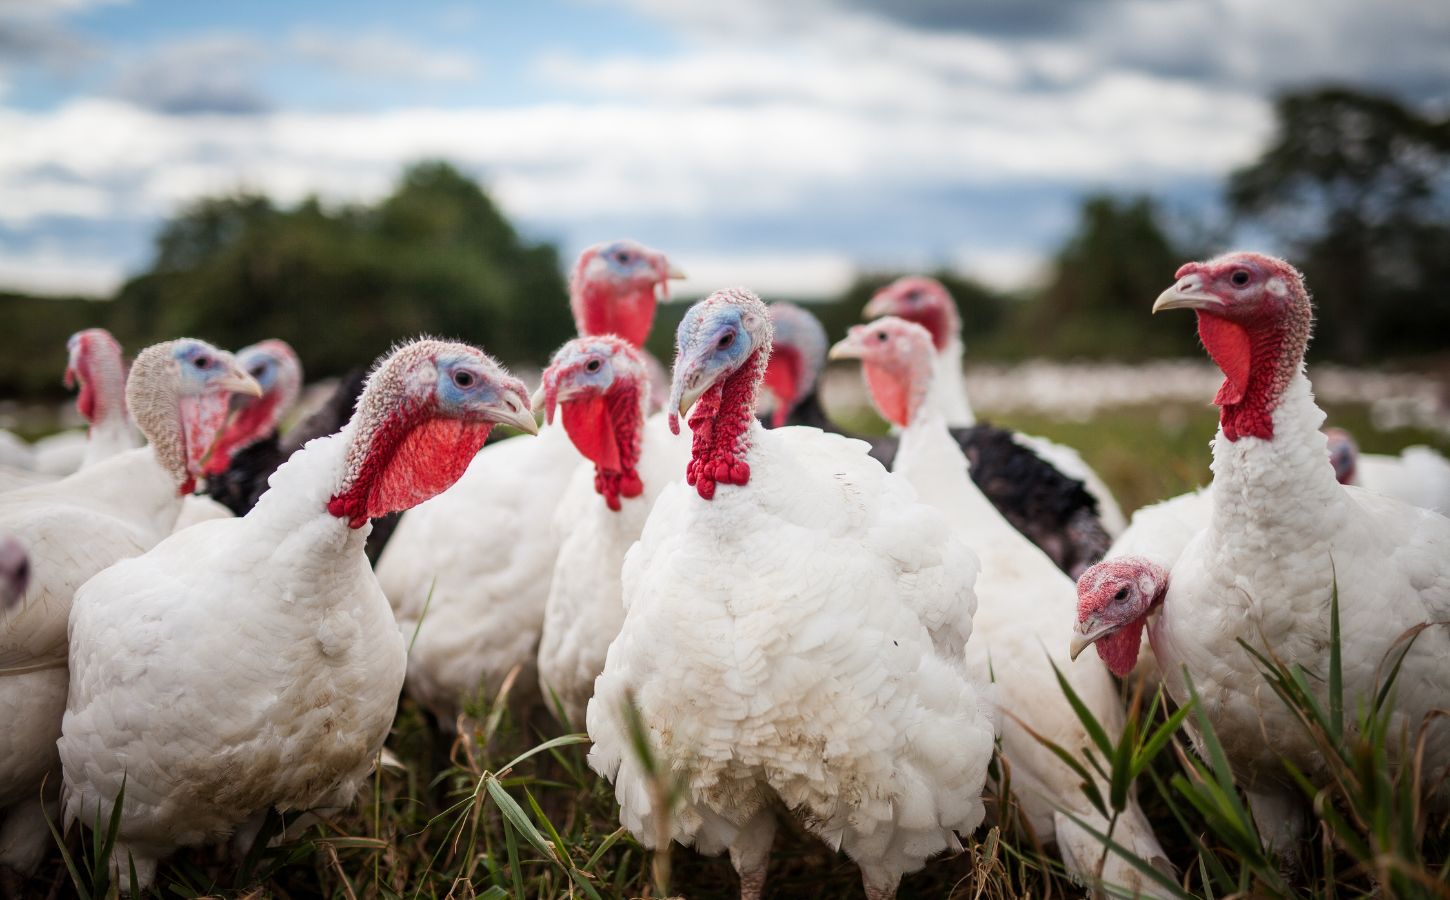 A group of Christmas turkeys stood together in a field